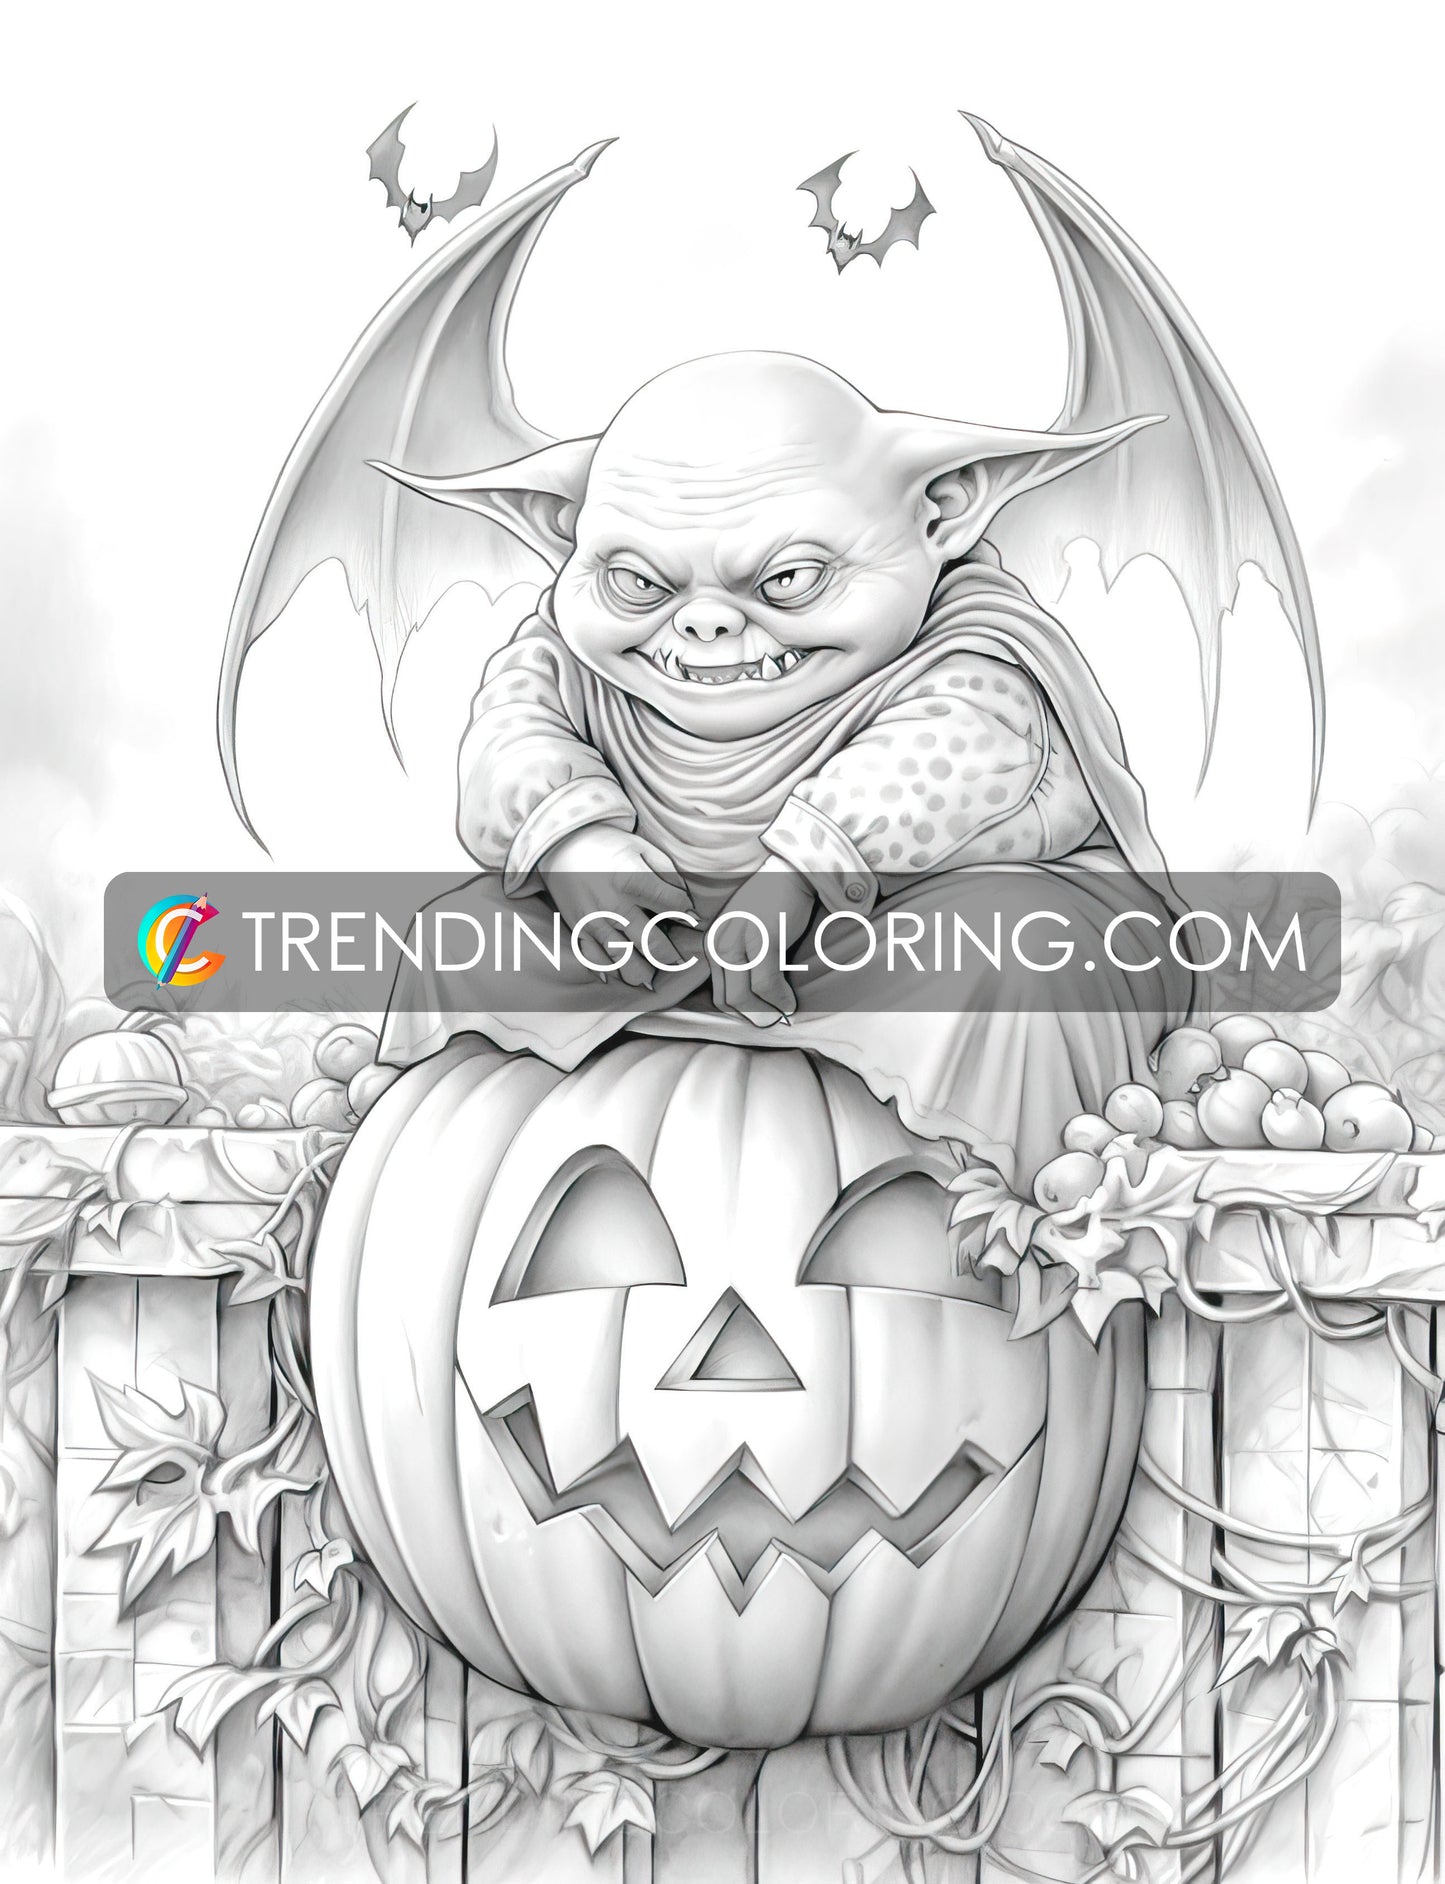 Free Halloween Coloring Pages - Instant Download Freepage